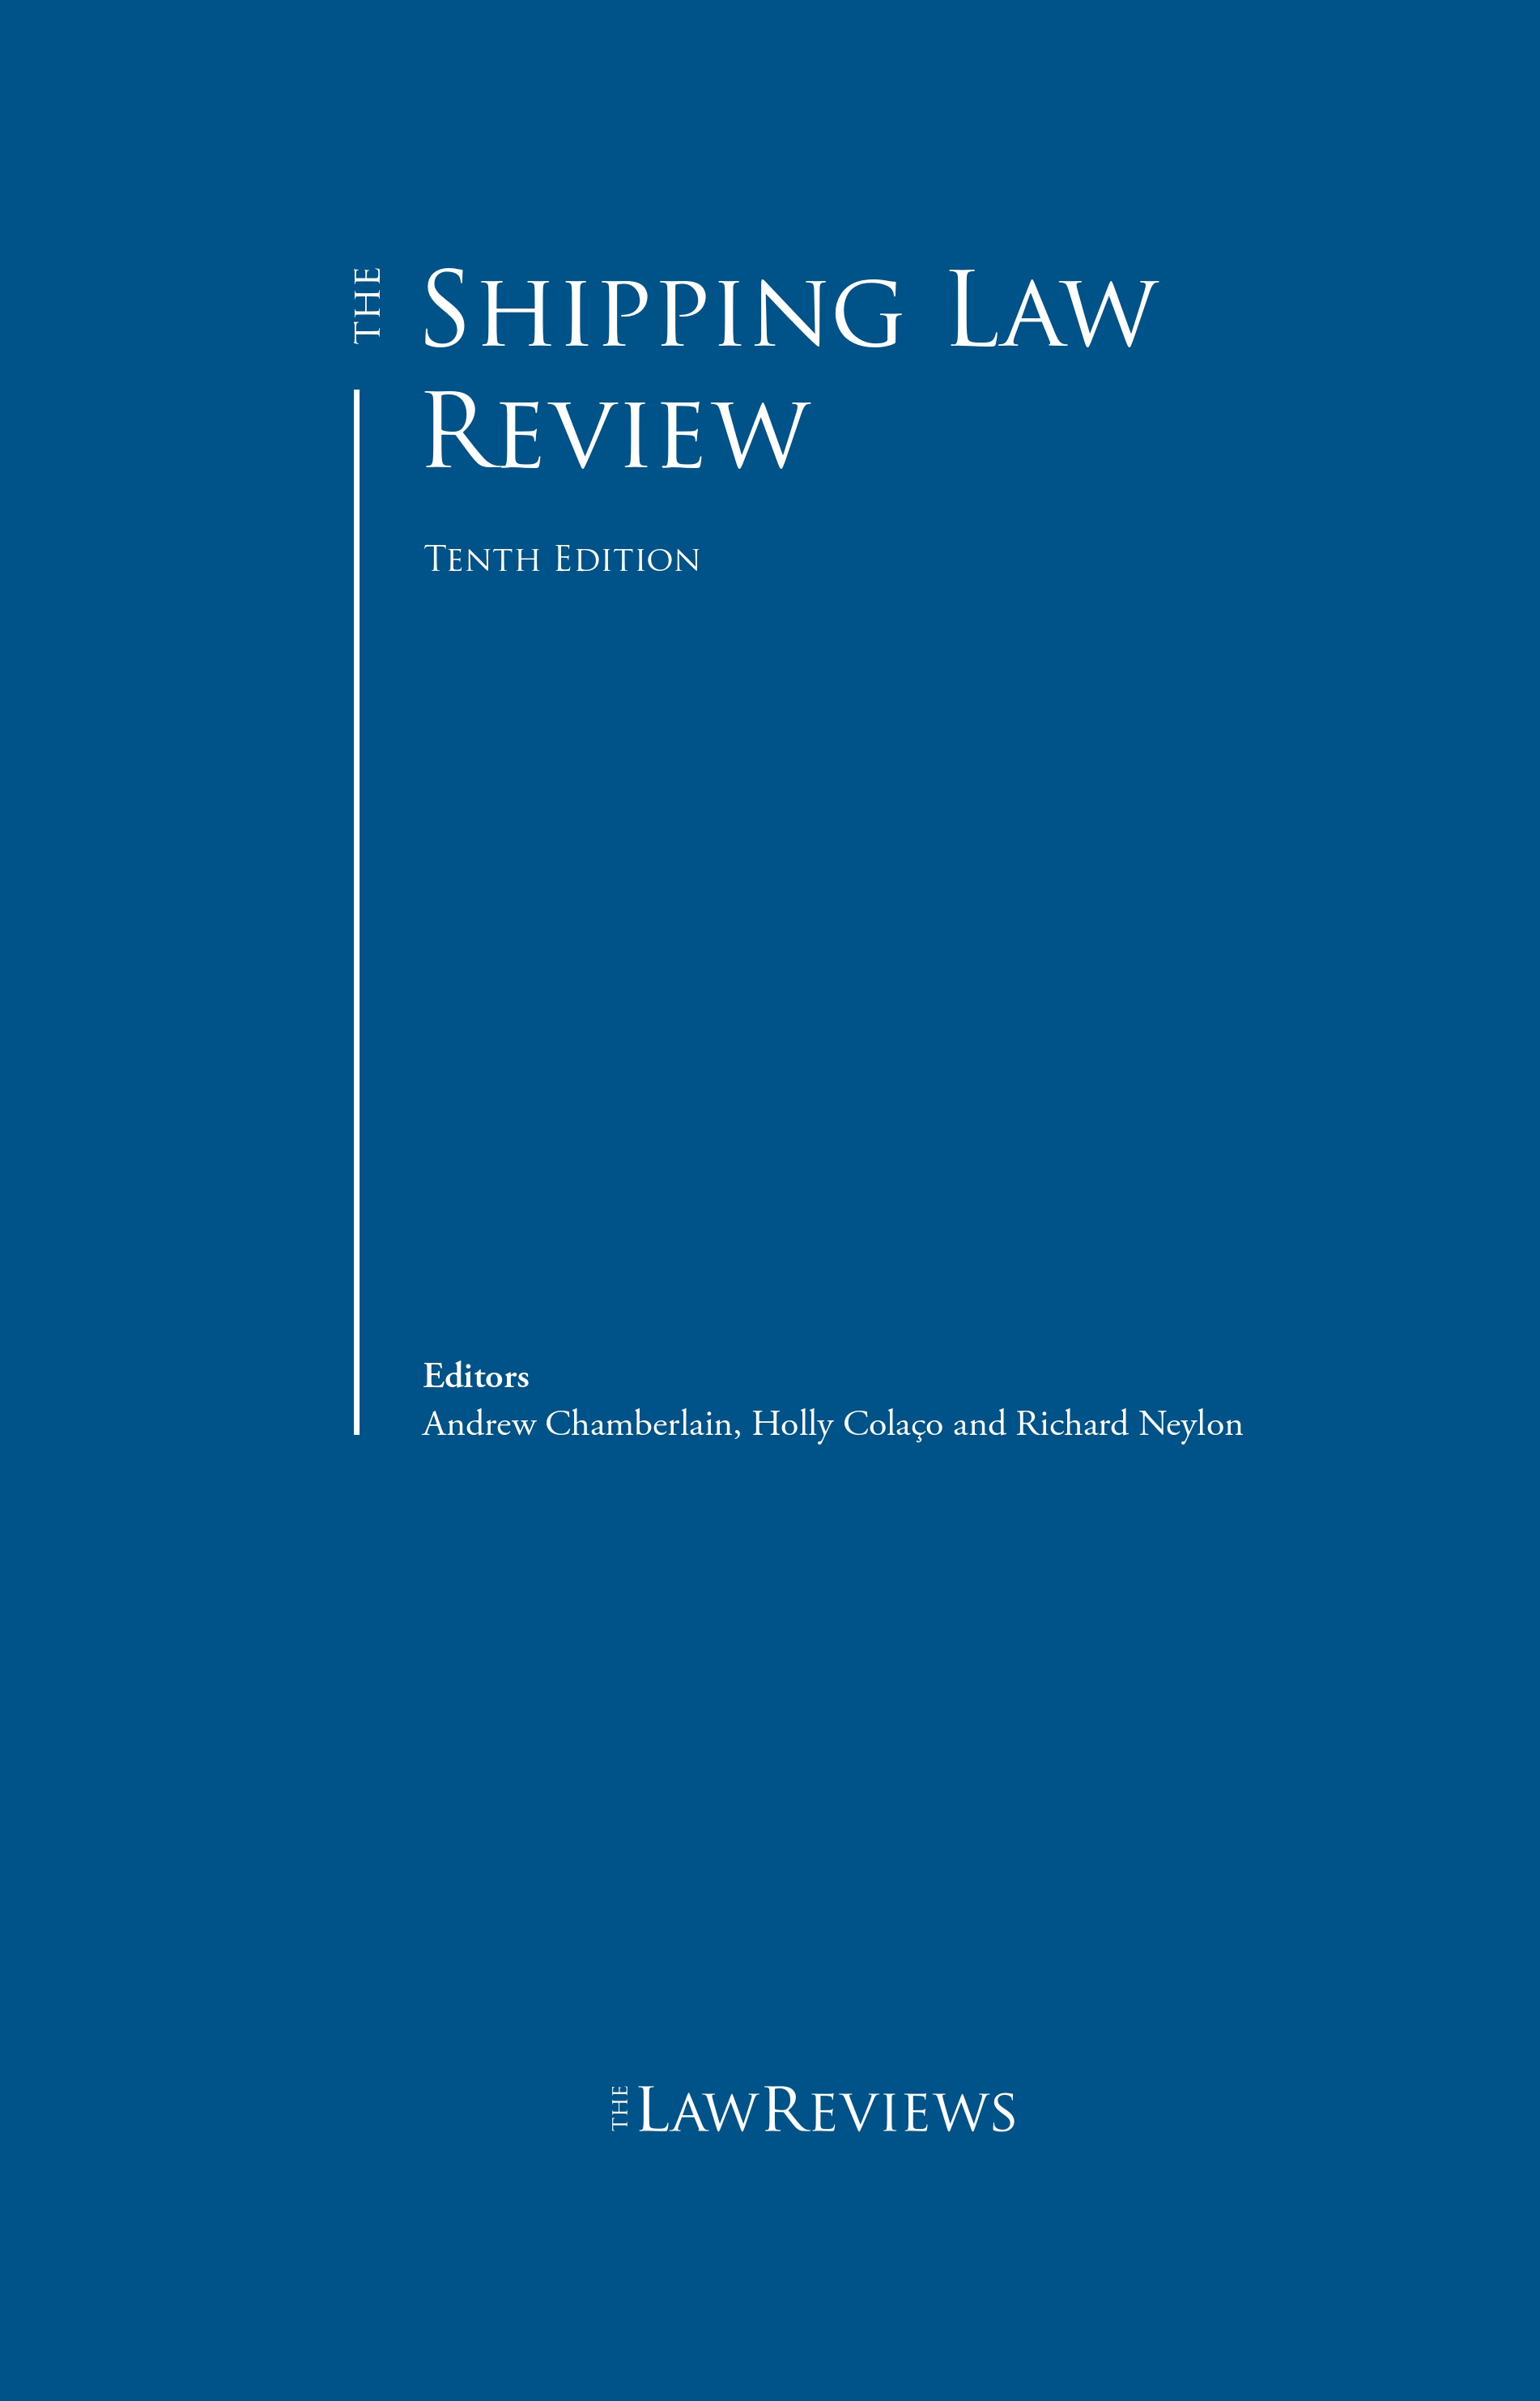 The Shipping Law Review Tenth Edition